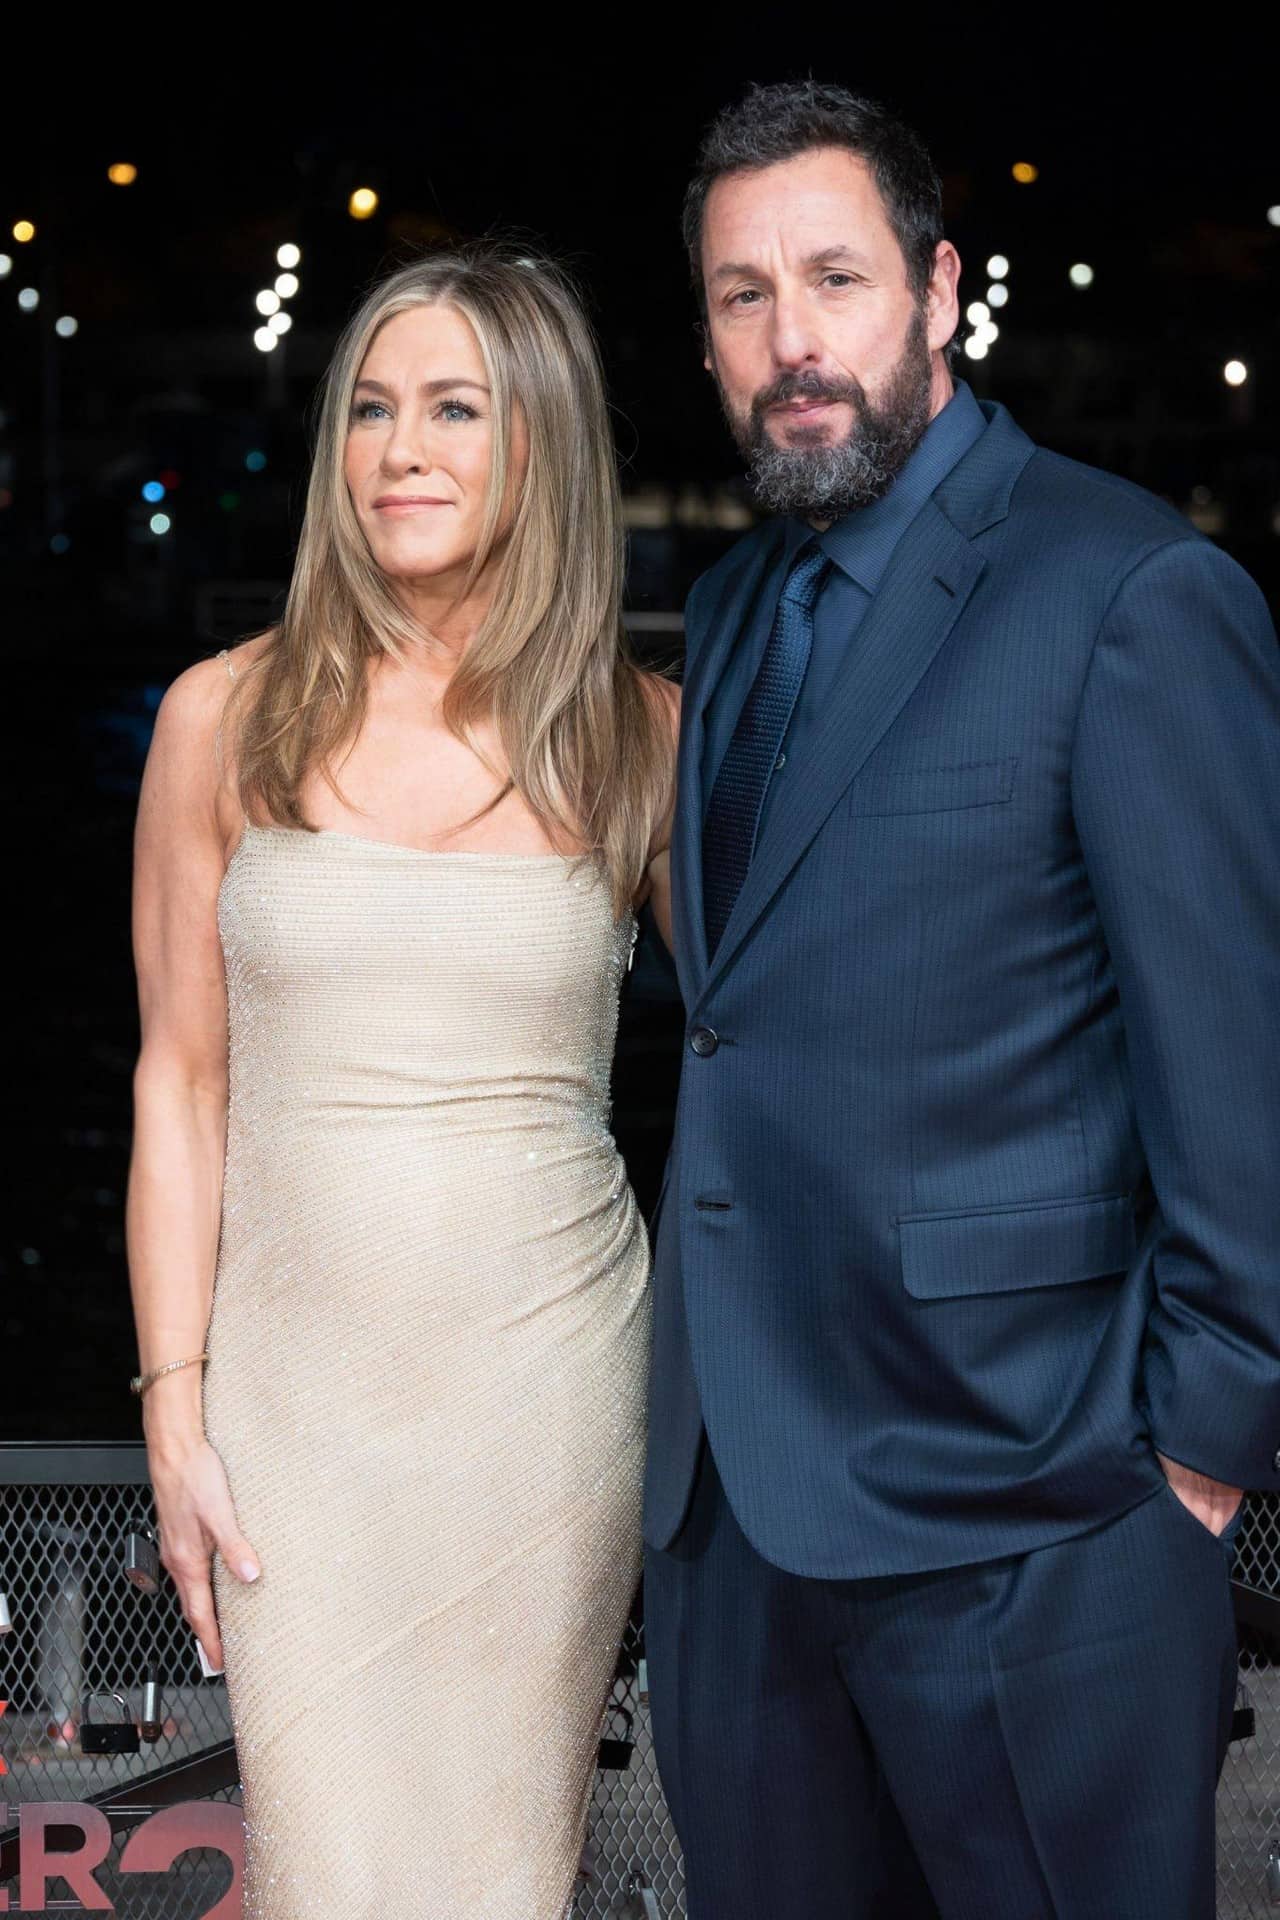 Jennifer Aniston Attends the "Murder Mystery 2" Photocall in France